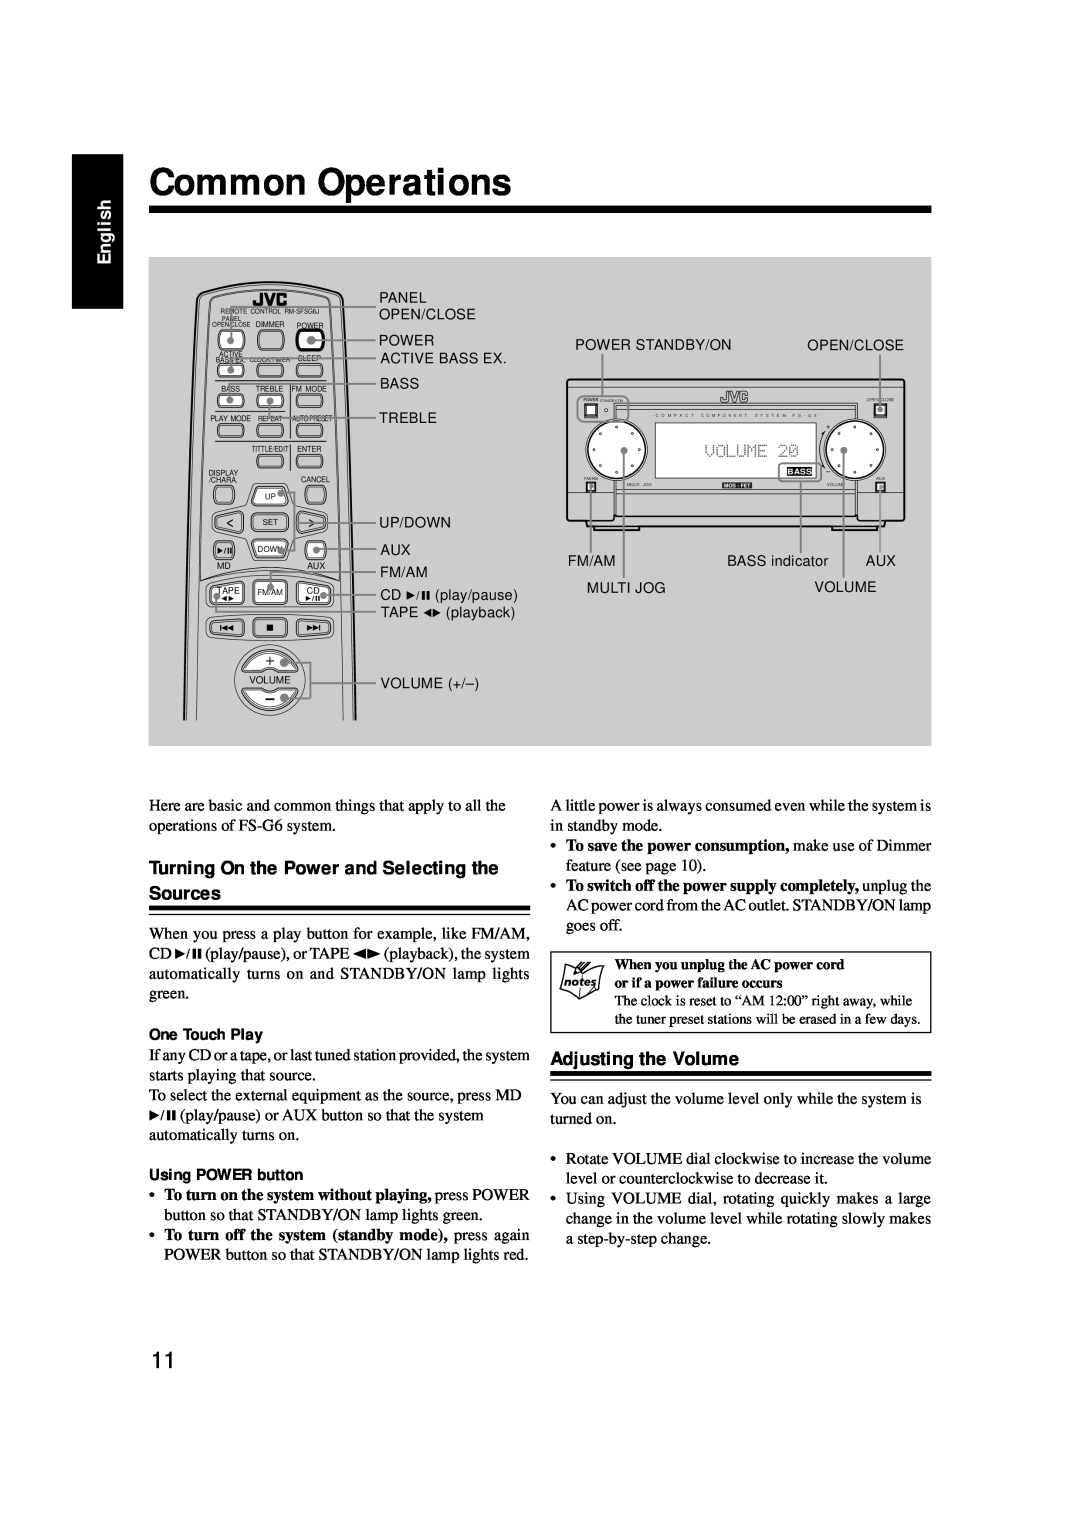 JVC FS-G6 Common Operations, Turning On the Power and Selecting the Sources, Adjusting the Volume, One Touch Play, English 